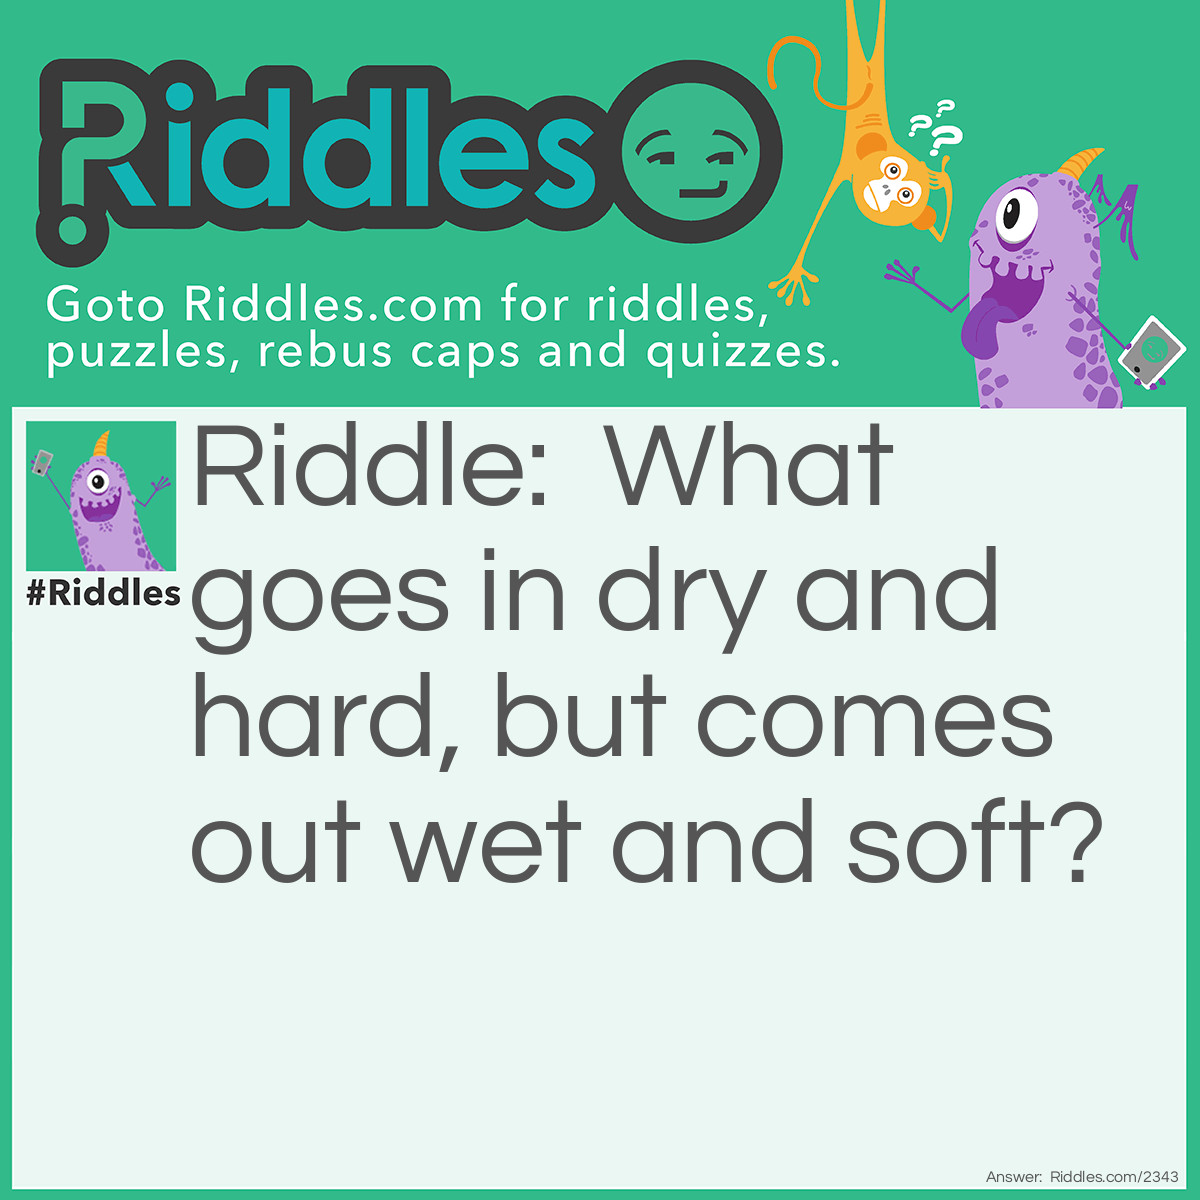 Riddle: What goes in dry and hard, but comes out wet and soft? Answer: Chewing gum.